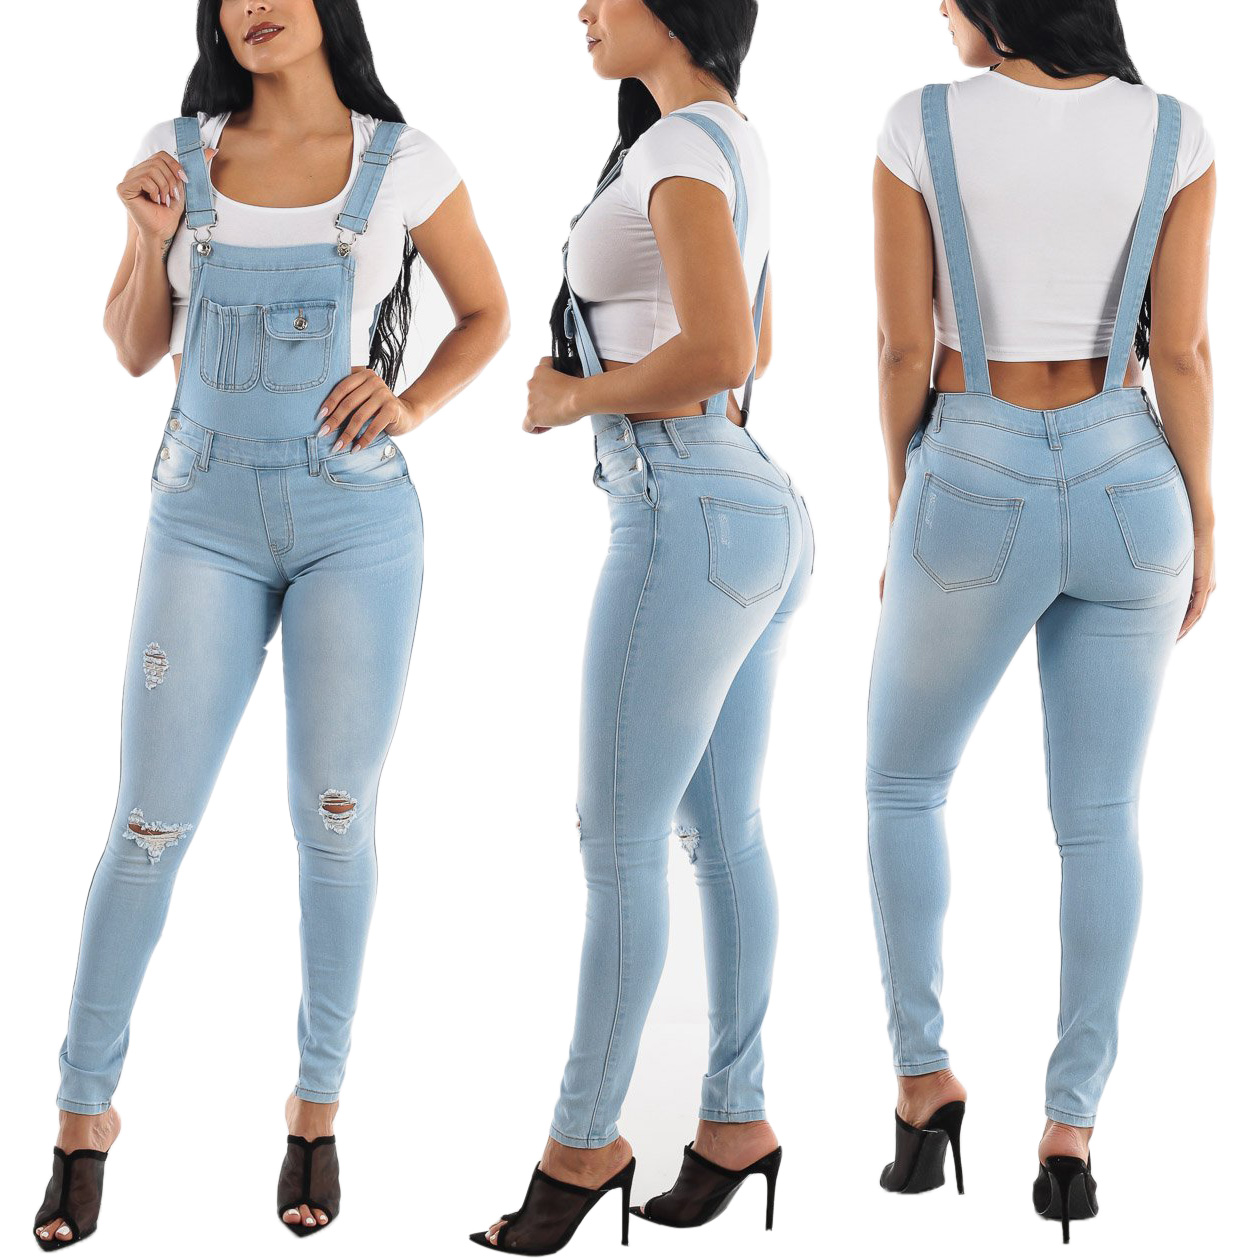 US$ 10.16 - Holed jeans and suspenders - www.keke-lover.com